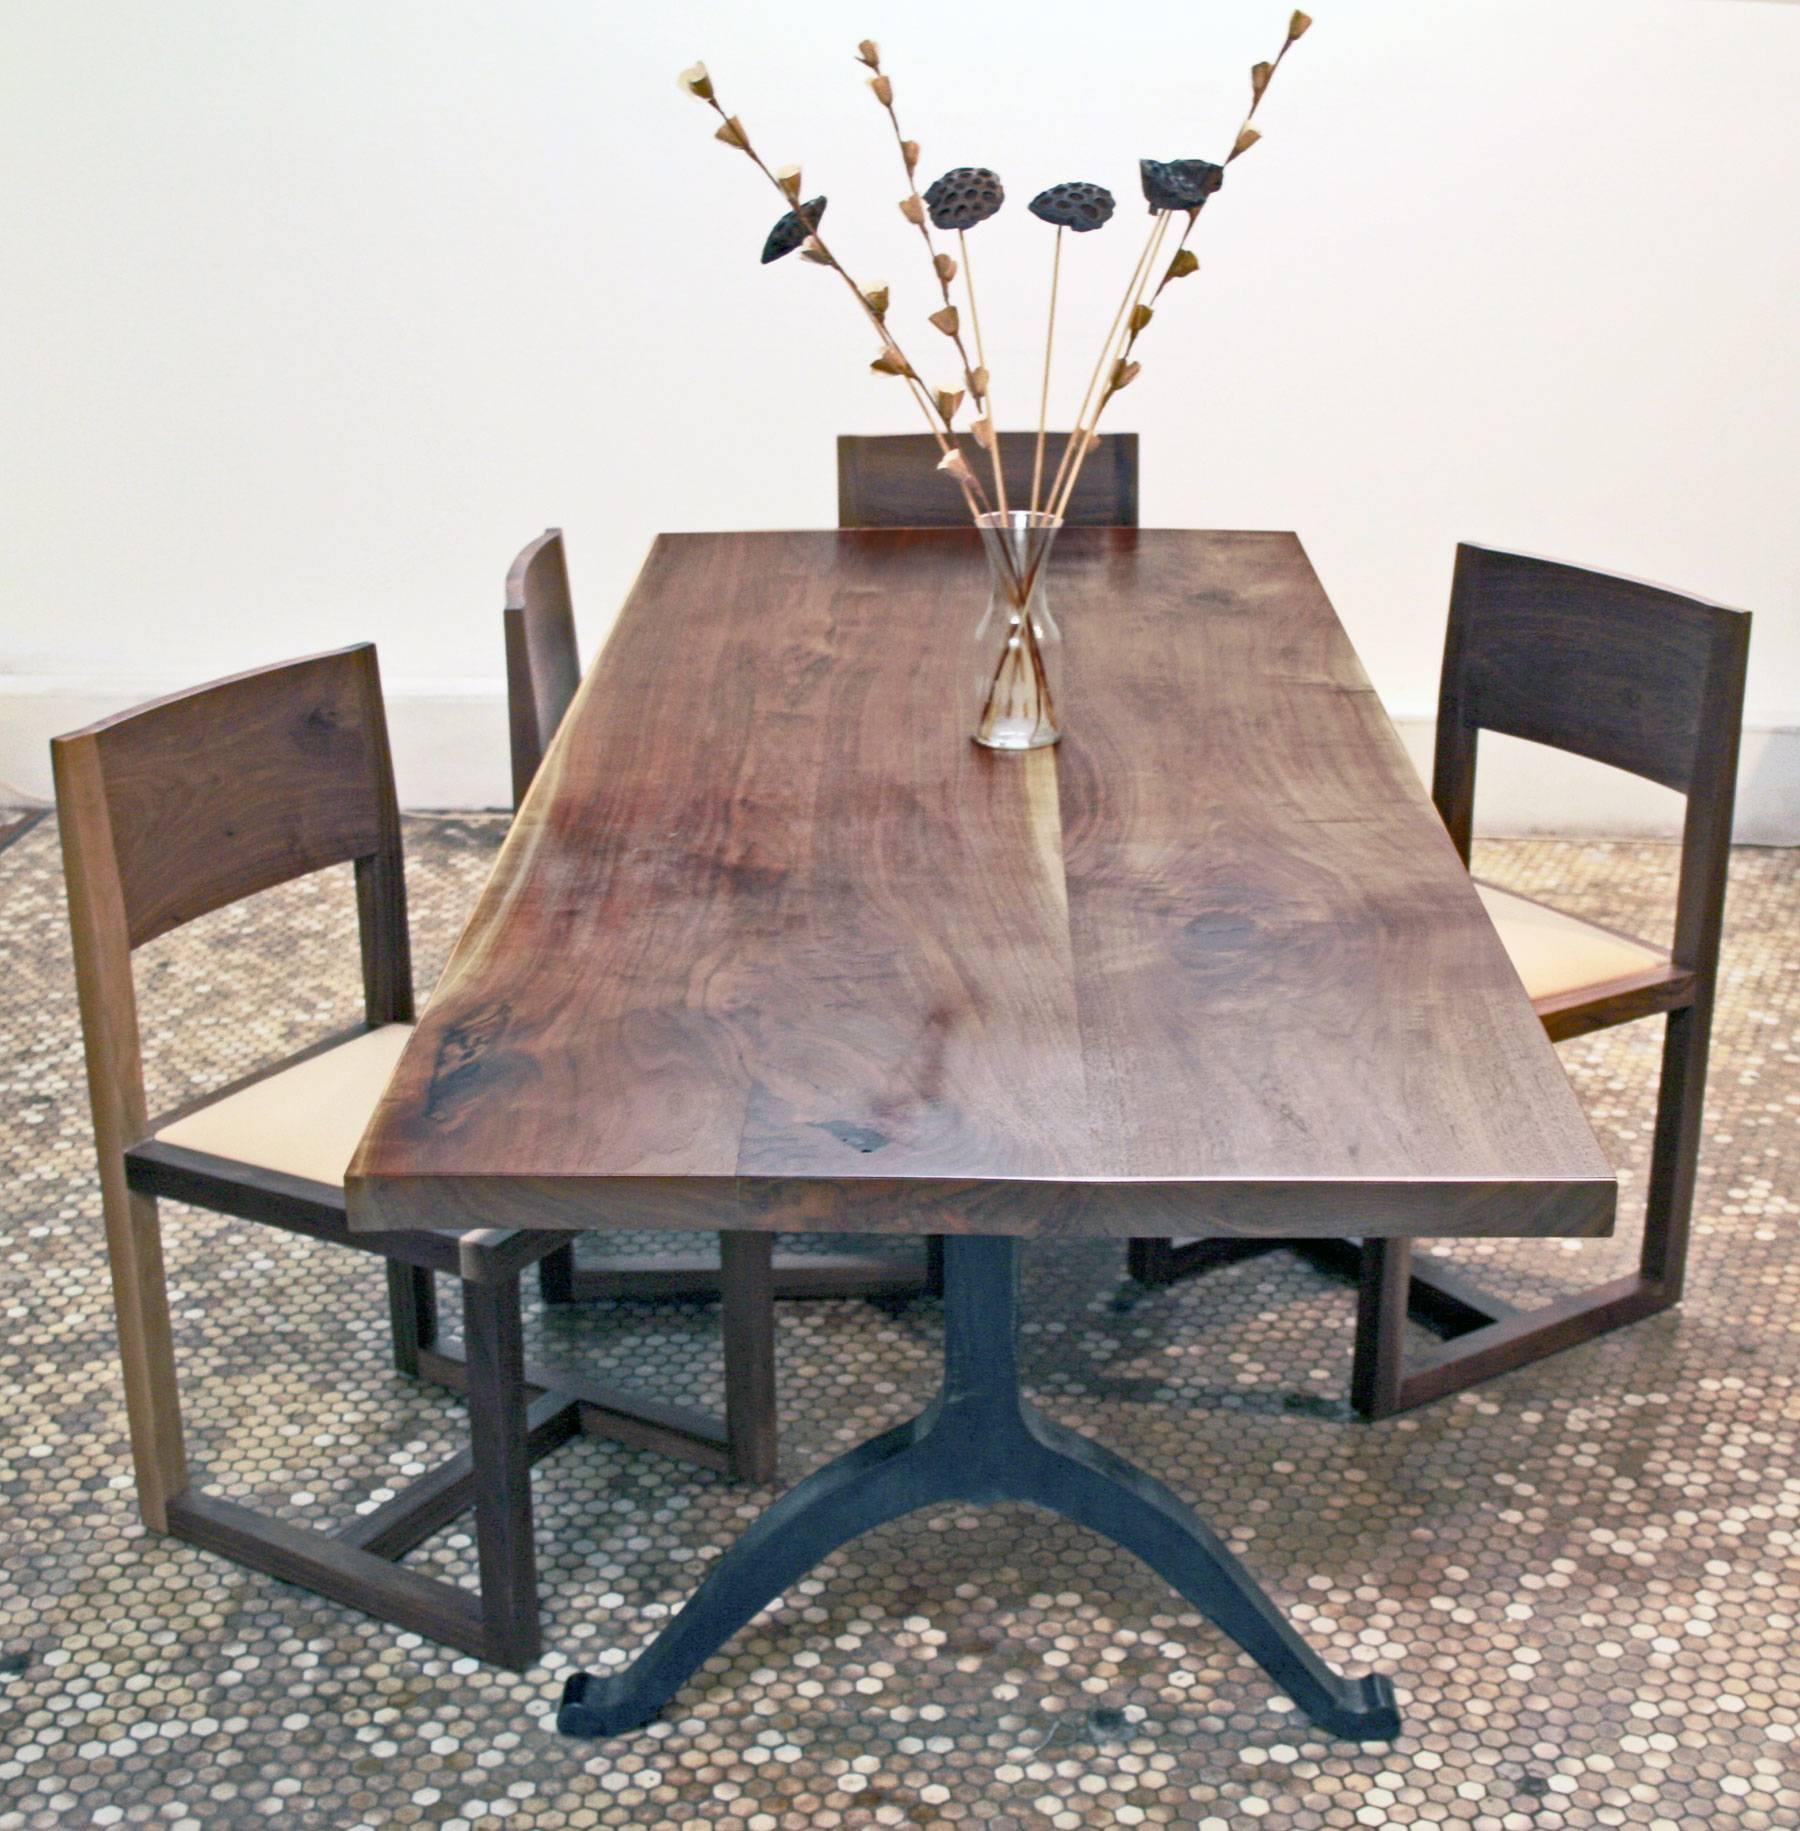 Contemporary American Black Walnut Farmhouse Table with Blackened Steel Wishbone Legs For Sale